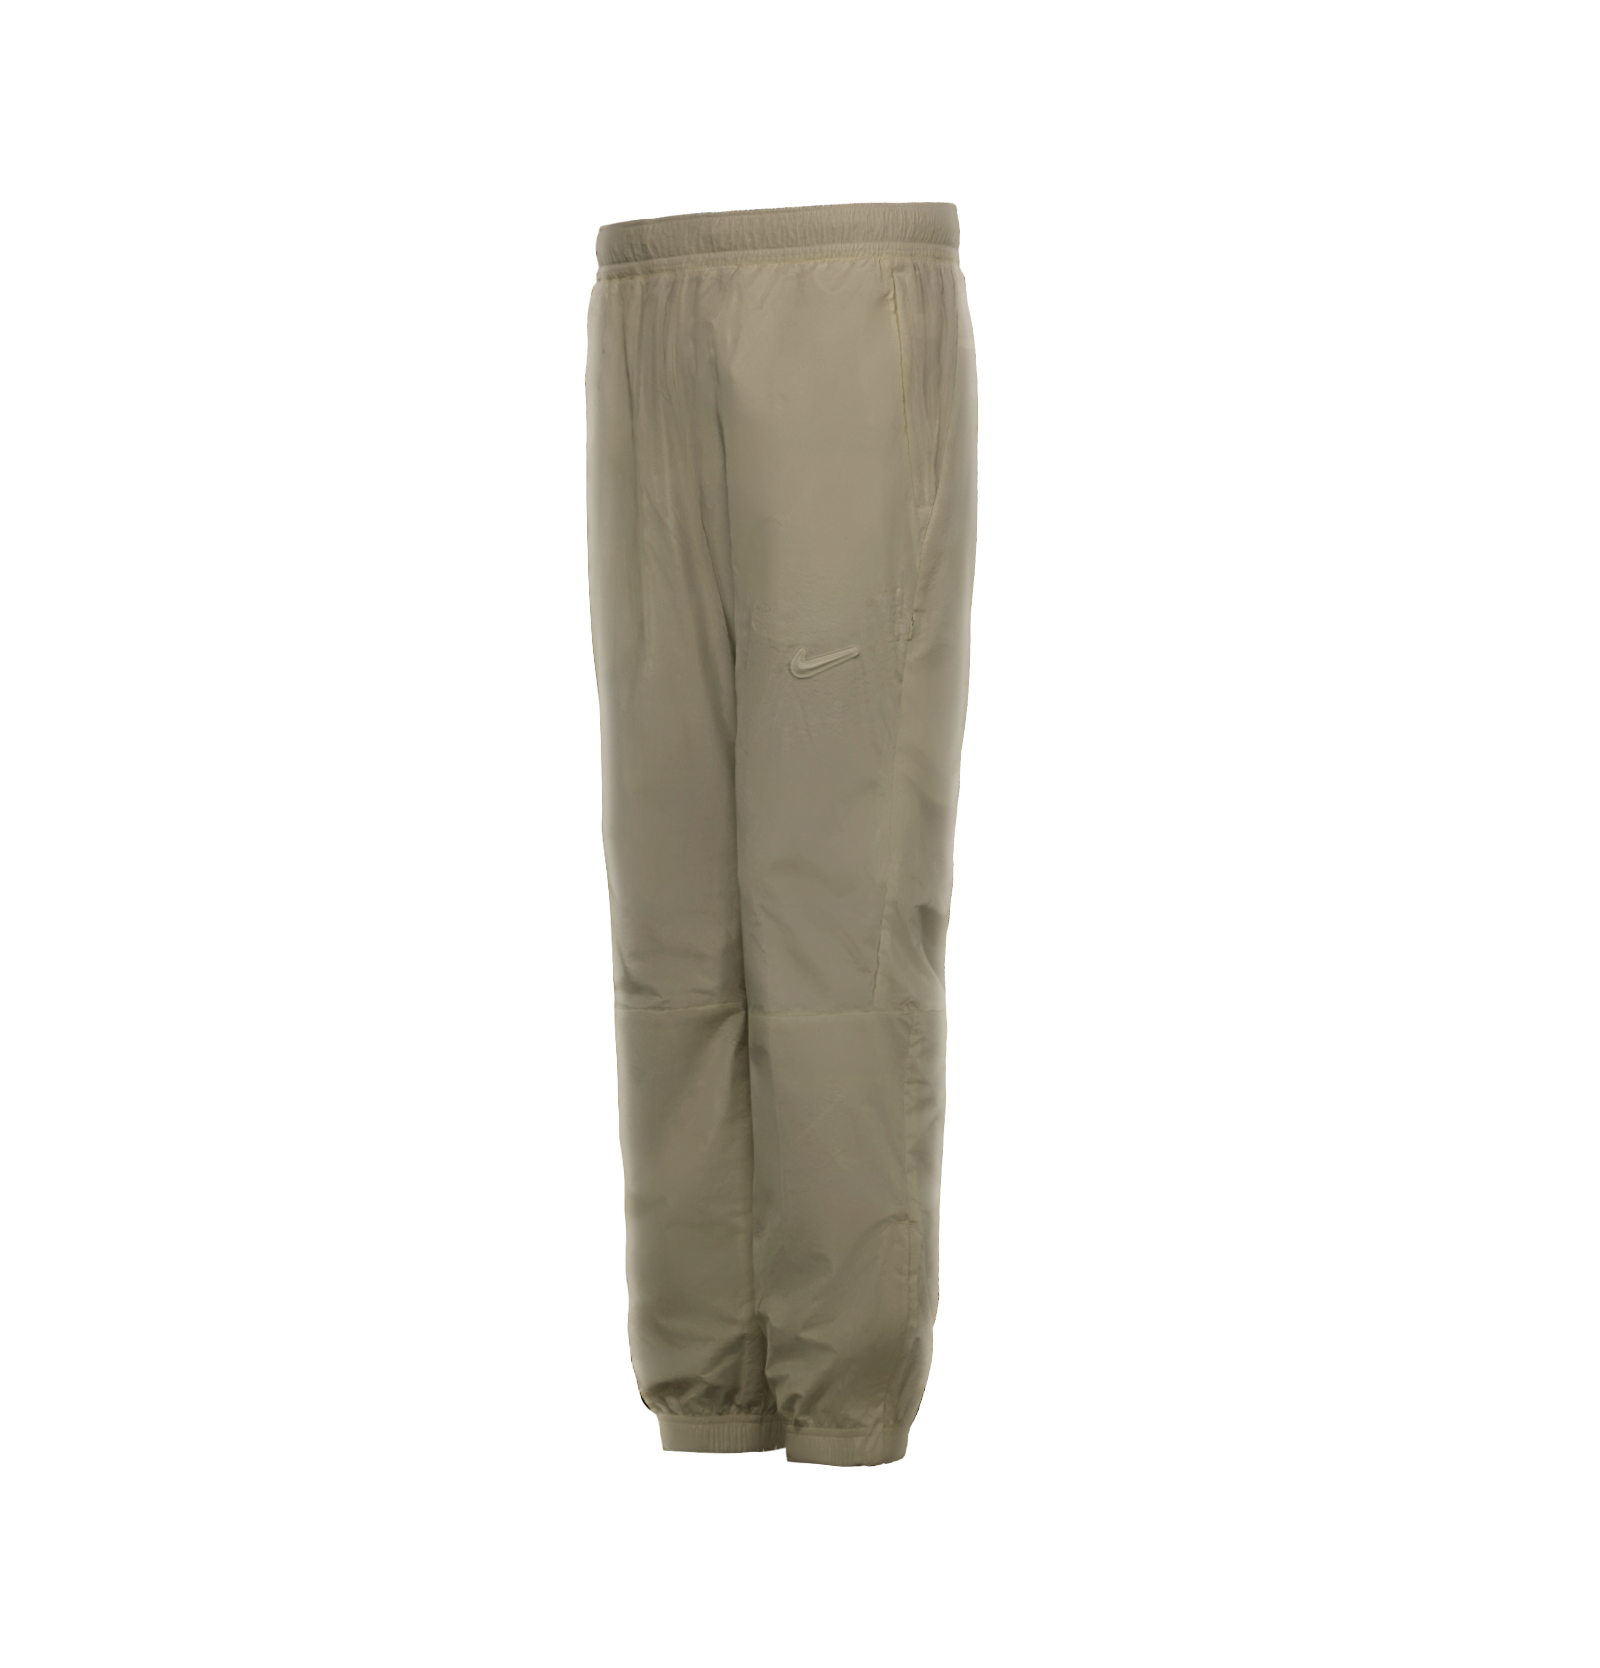 https://original.accentuate.io/7125373714581/1632250330809/NOCTA_WOVEN_TRACK_PANT_A2.png?v=0w_600